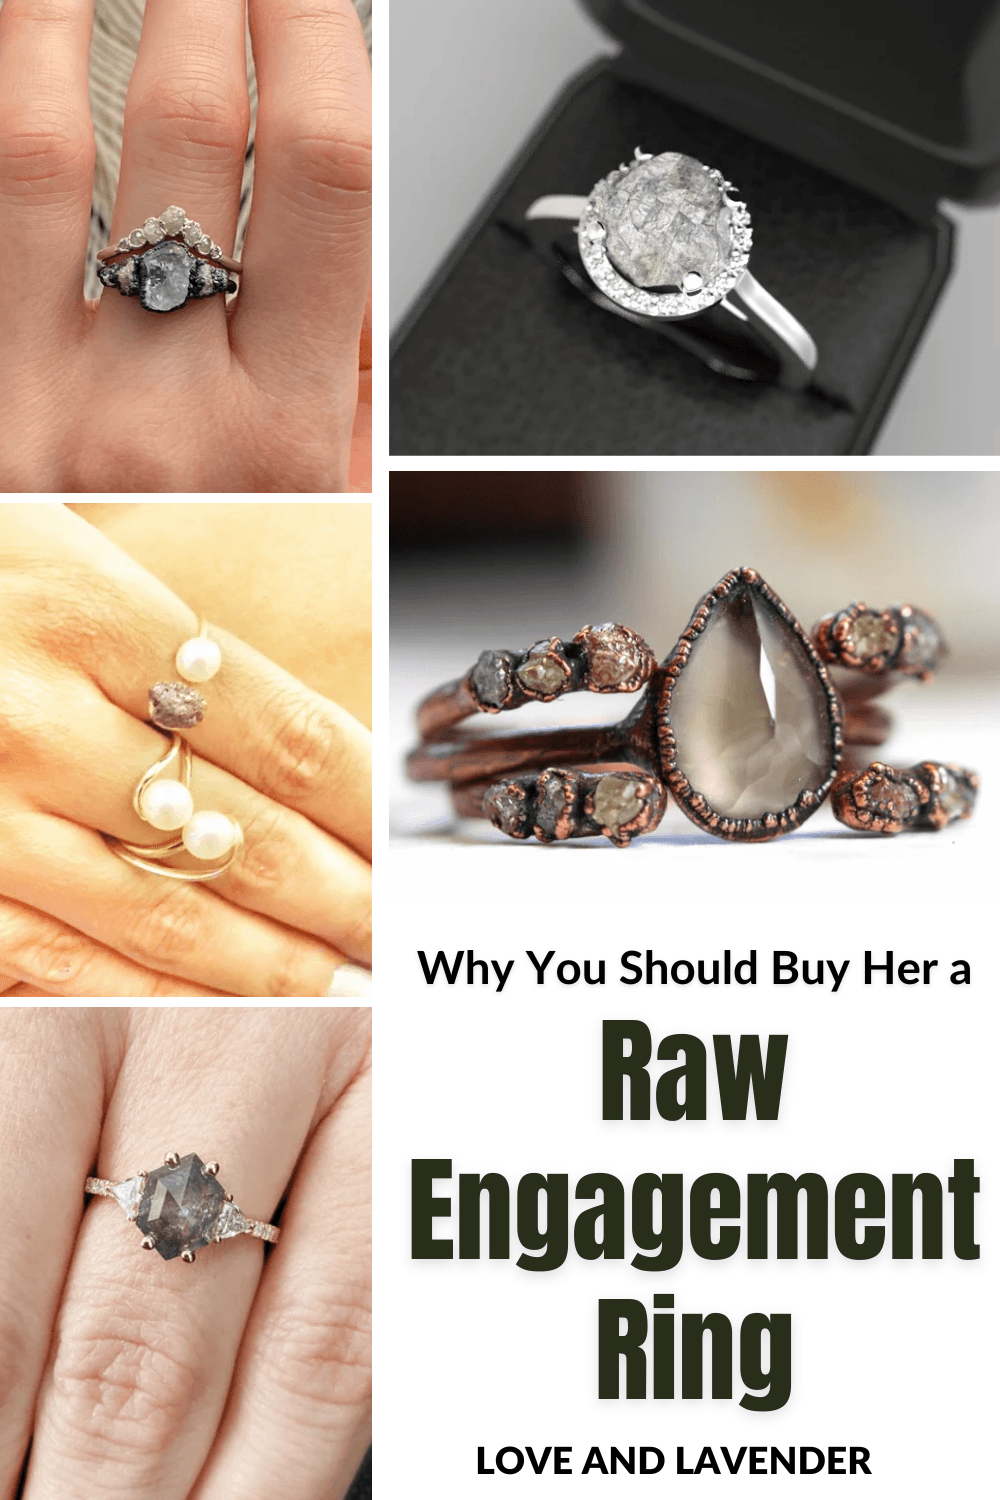 Ever want to propose with an engagement ring that is unique and represents you? Raw Diamond Engagement Rings are far from ordinary, but still very beautiful. Instead of purchasing a traditional diamond, you can buy an engagement ring made from one of these raw diamonds and create your own unique piece of jewelry.